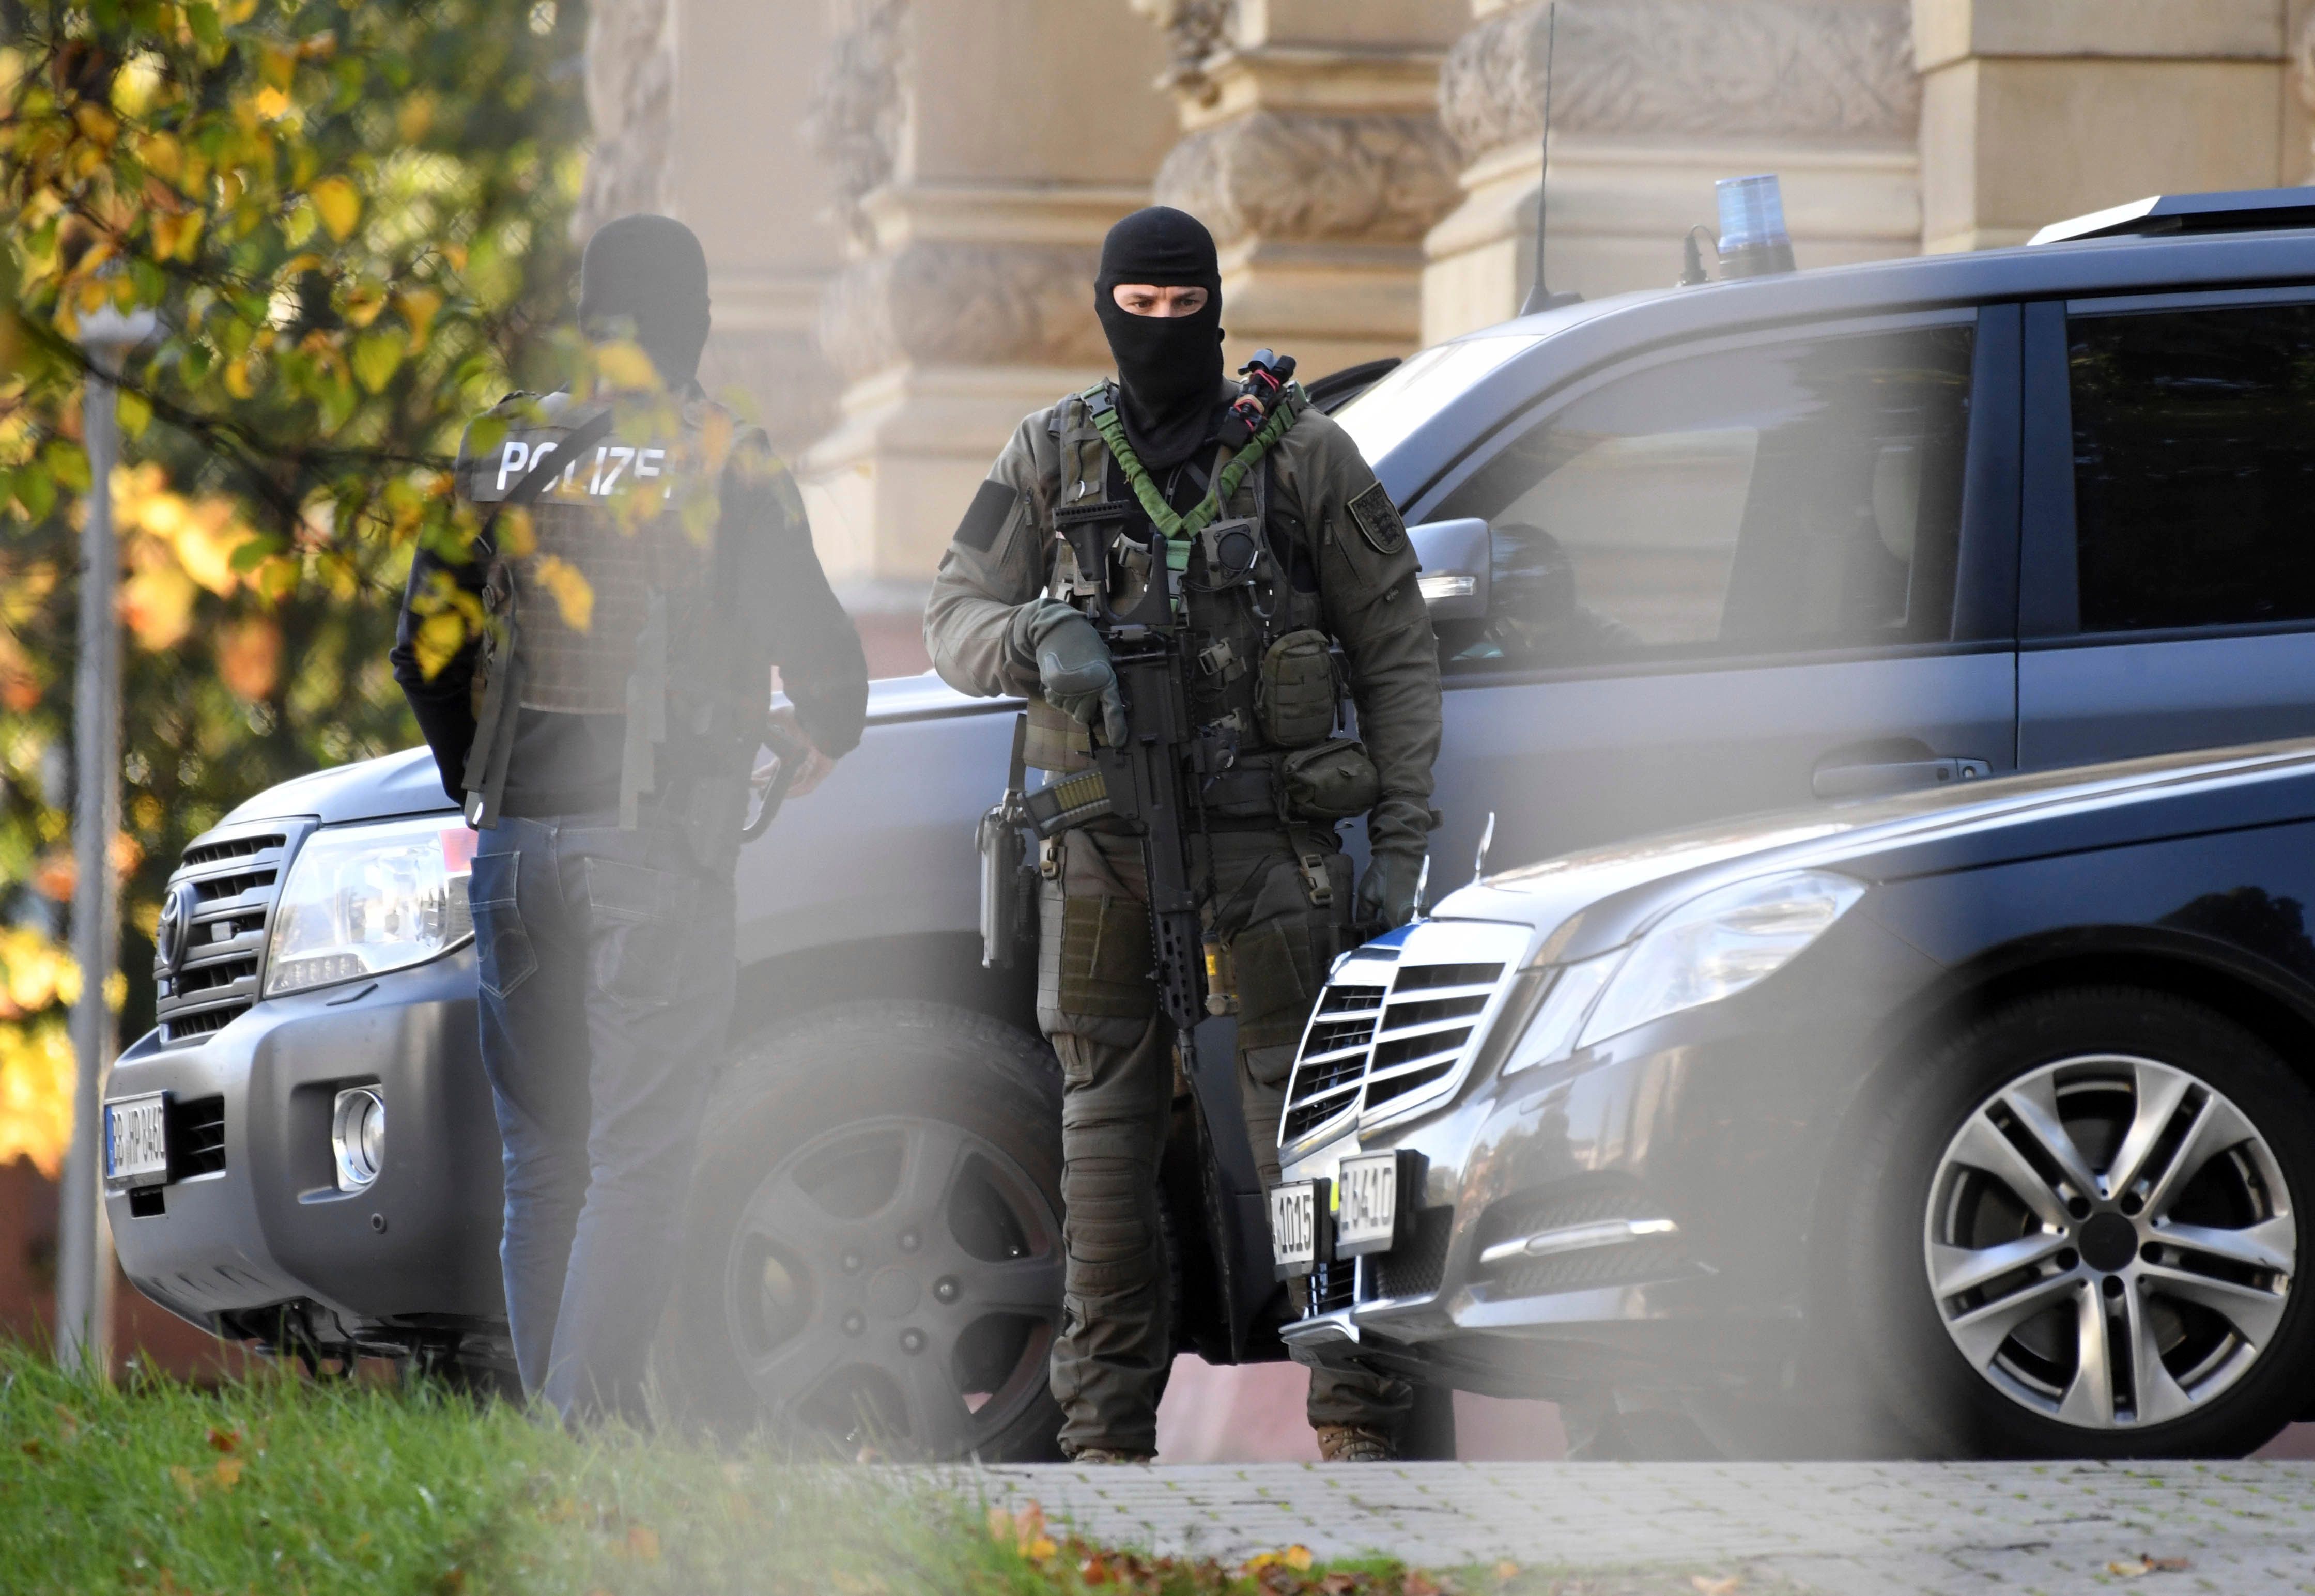 Three Iraqis Arrested In Germany Over Alleged Attack Plot I24news